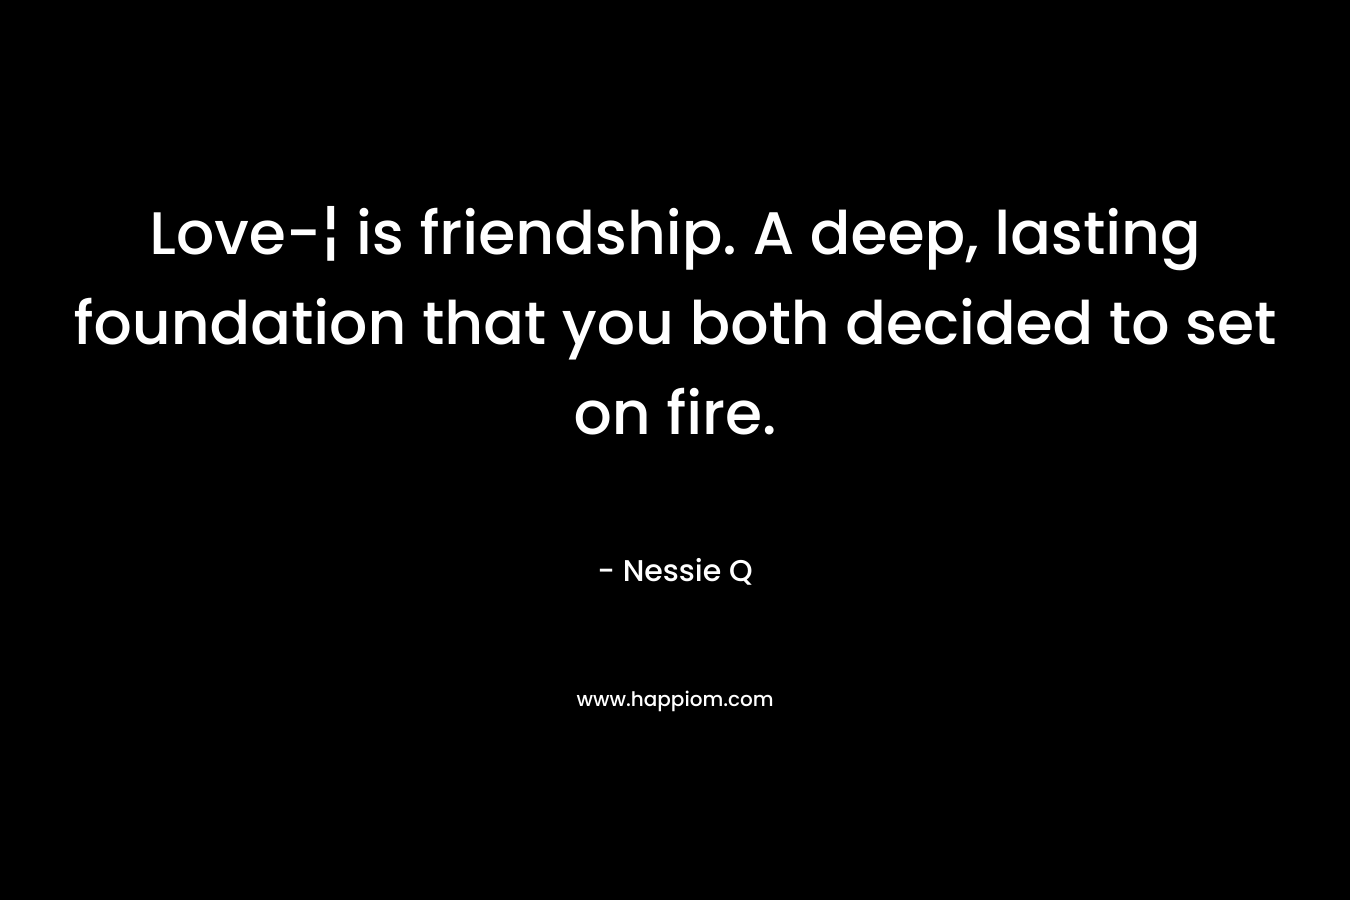 Love-¦ is friendship. A deep, lasting foundation that you both decided to set on fire. – Nessie Q